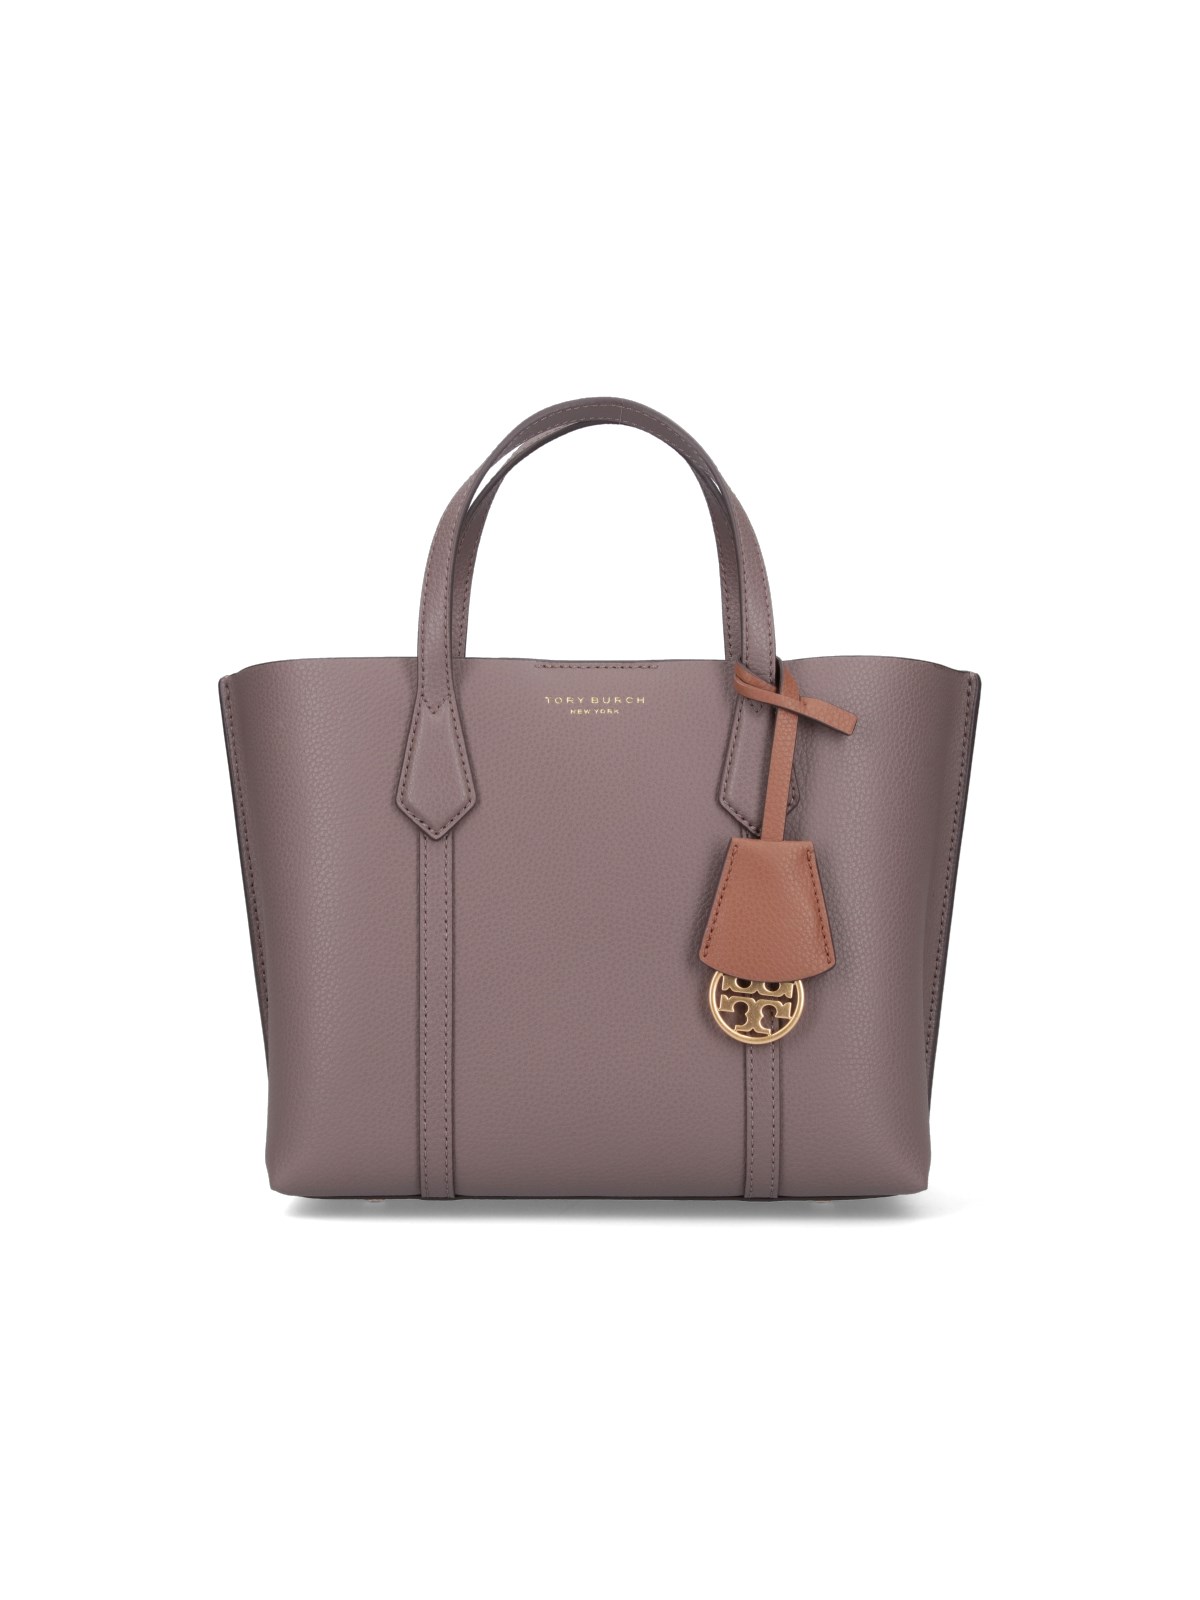 Shop Tory Burch Small Tote Bag "perry" In Taupe